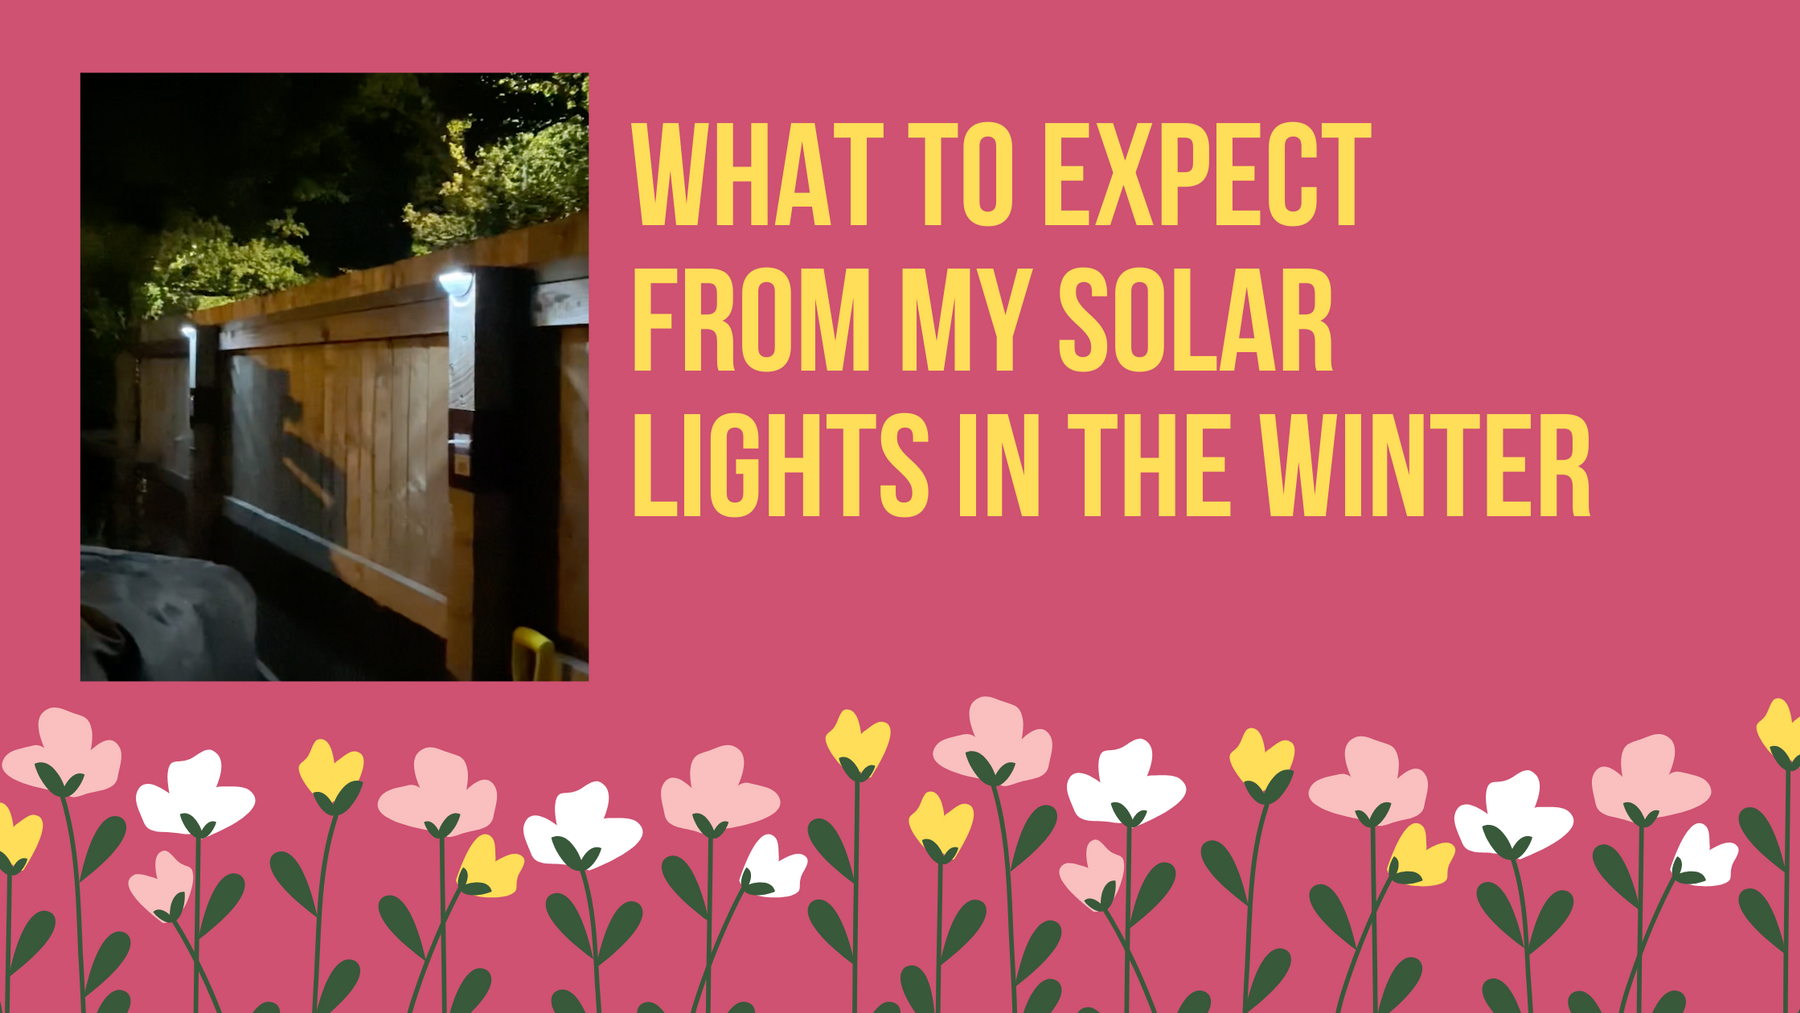 What to expect from your Solar Lights this Winter...